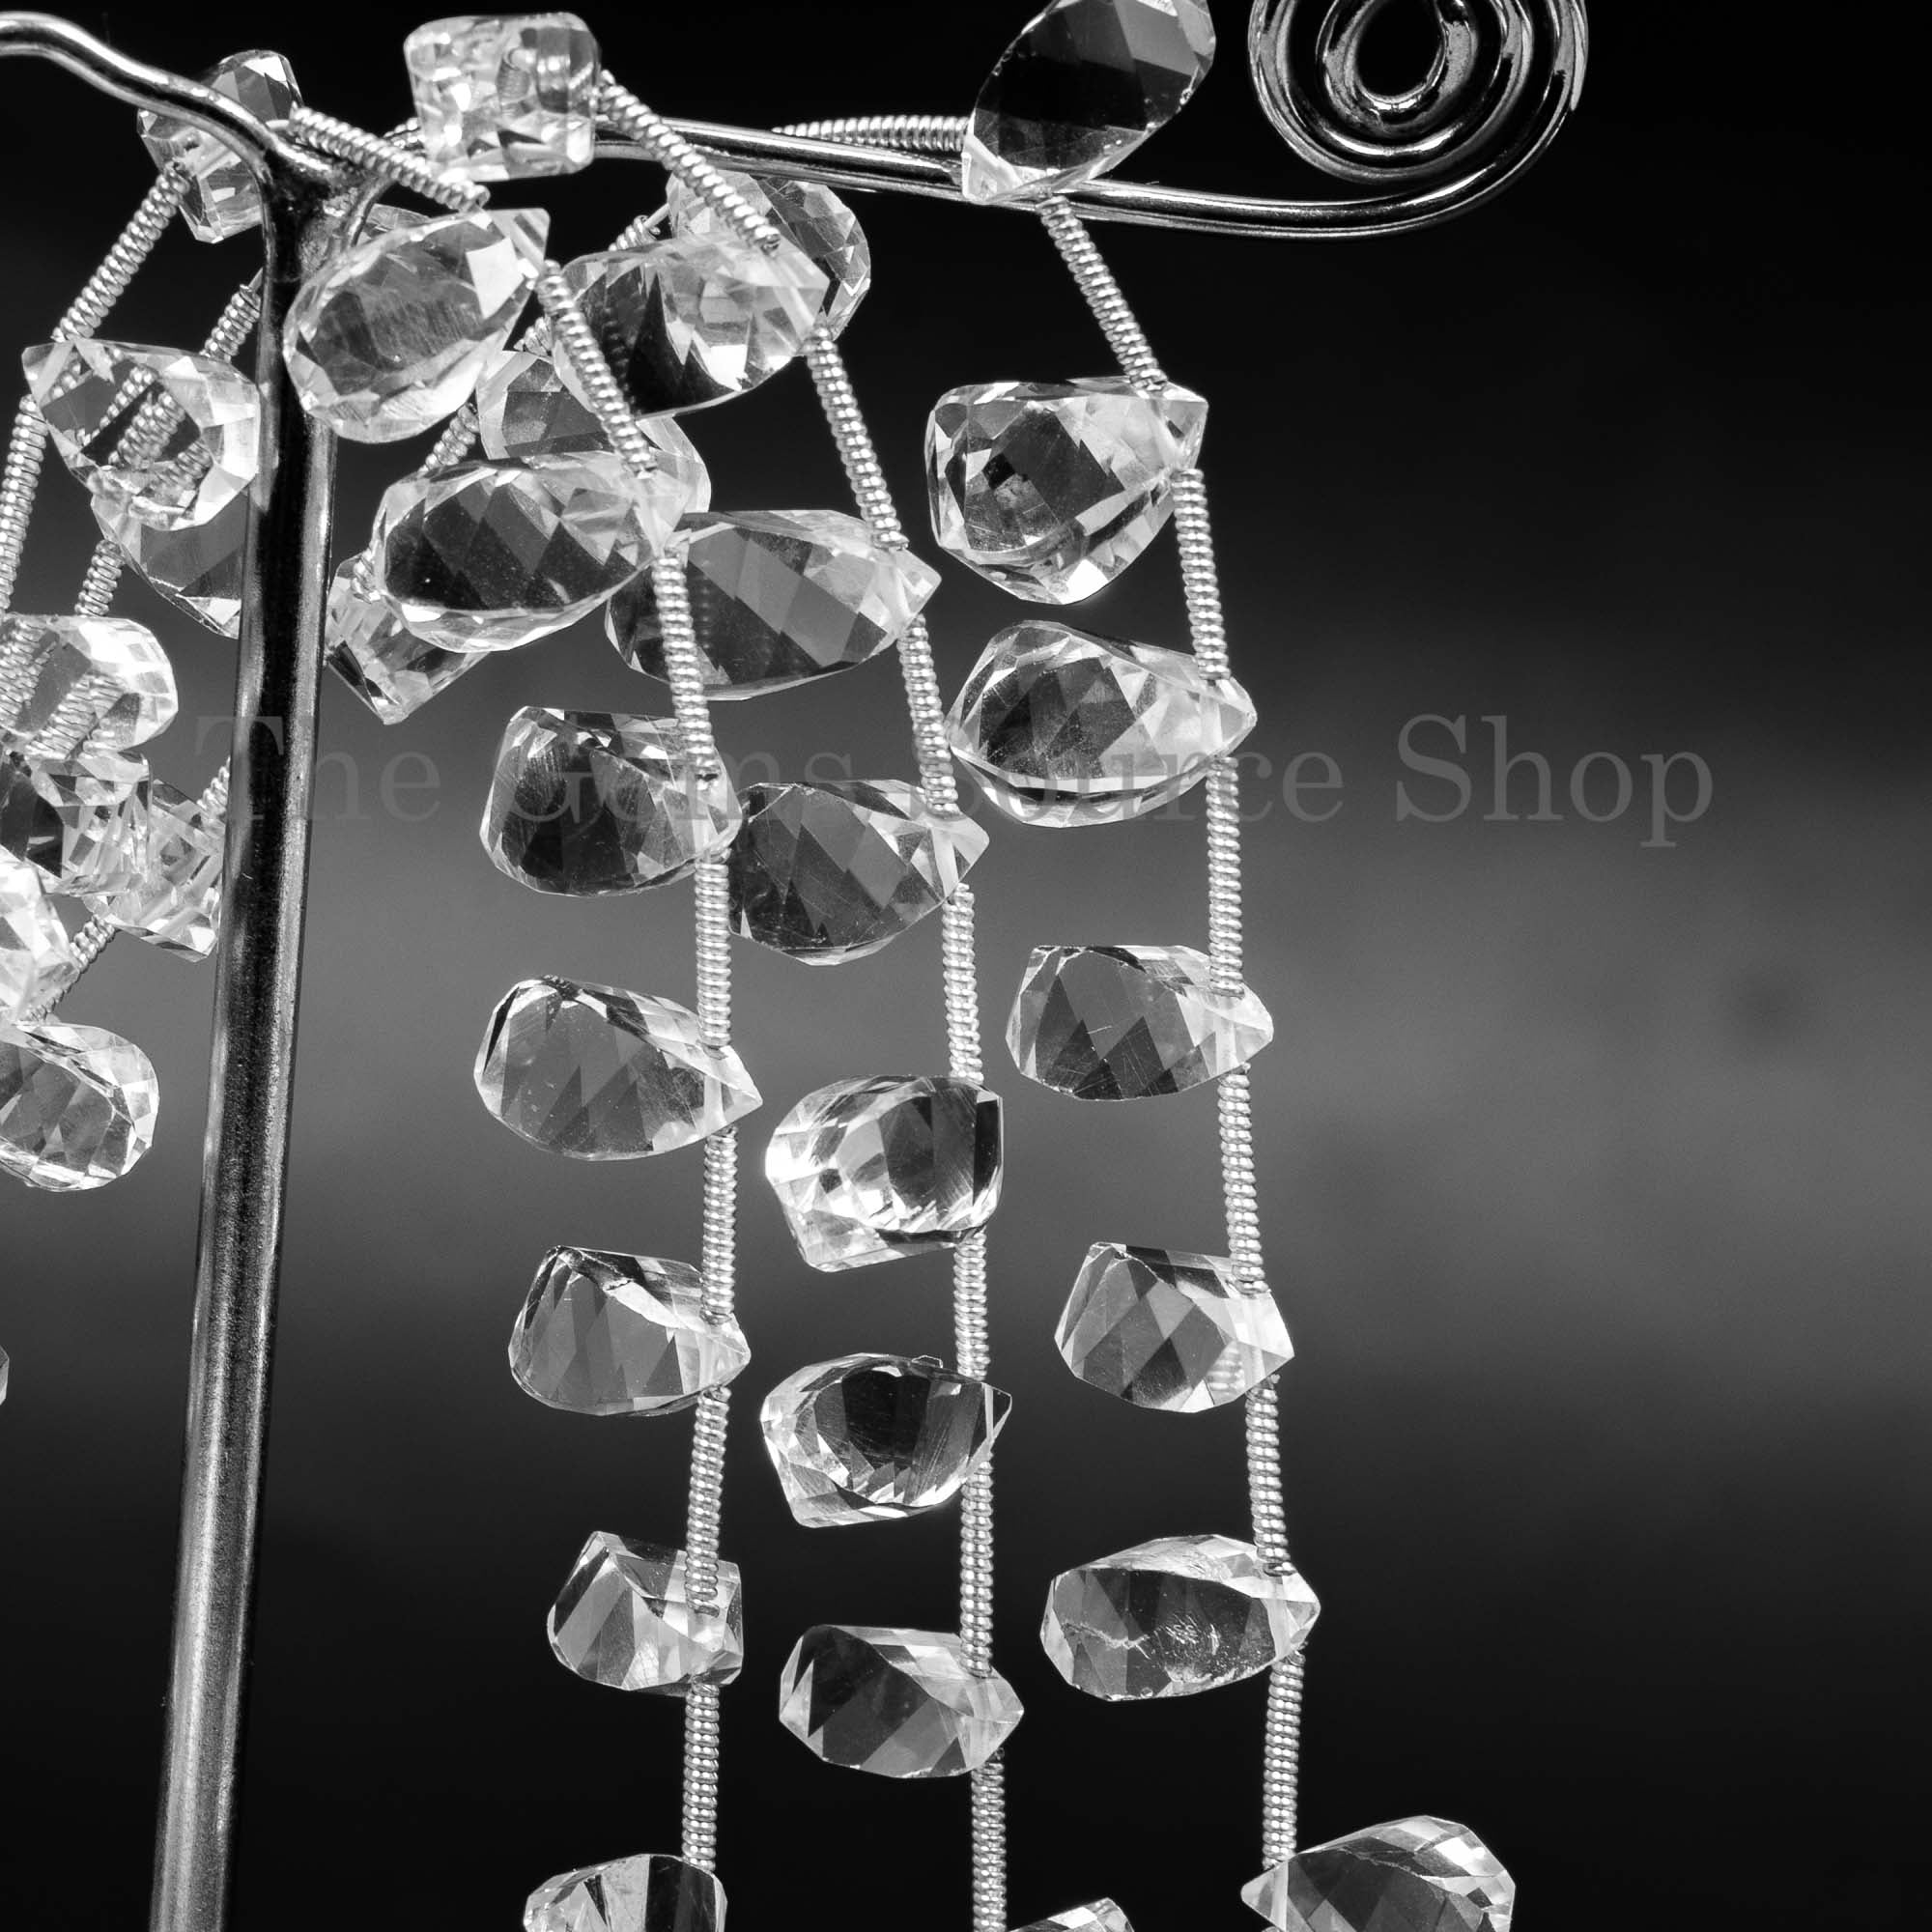 Crystal Quartz Faceted Twisted Drop Beads, Crystal Quartz Fancy Drop Beads